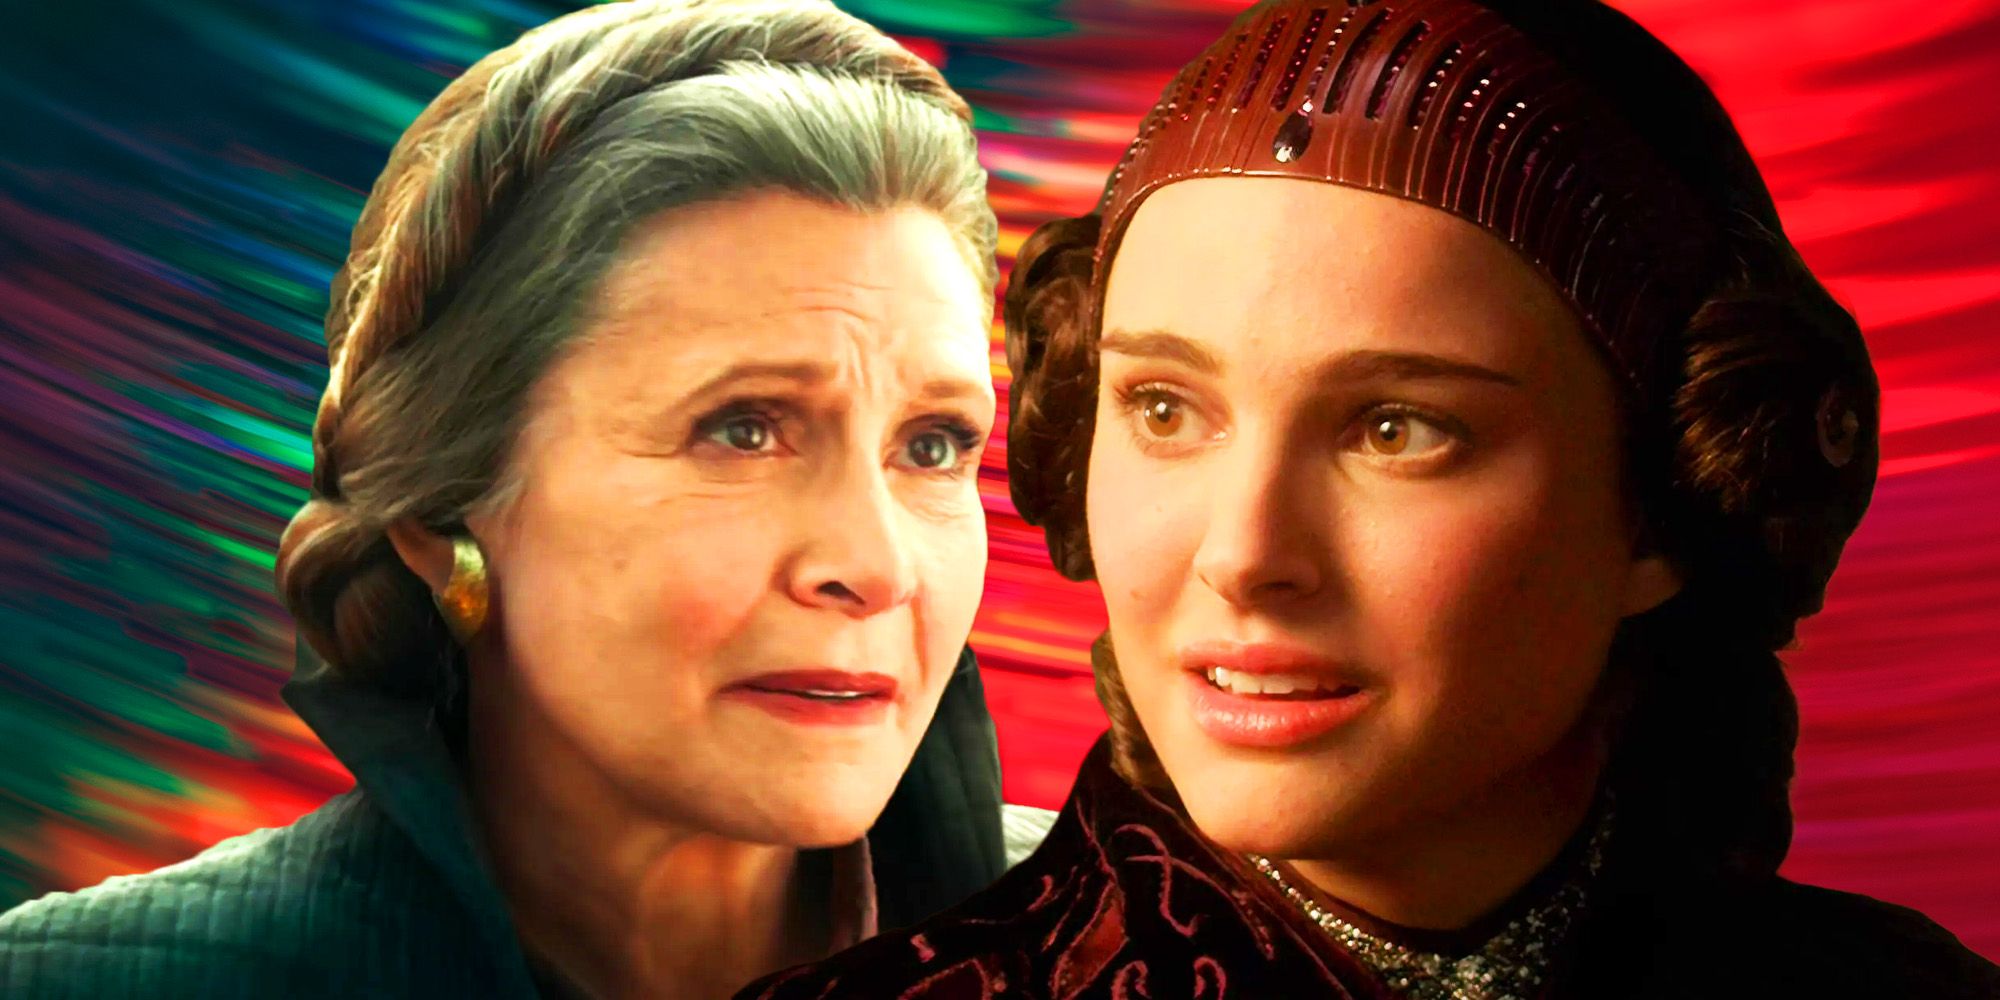 Carrie Fisher as Princess Leia from the sequel trilogy to the left and Natalie Portman as Padme to the right